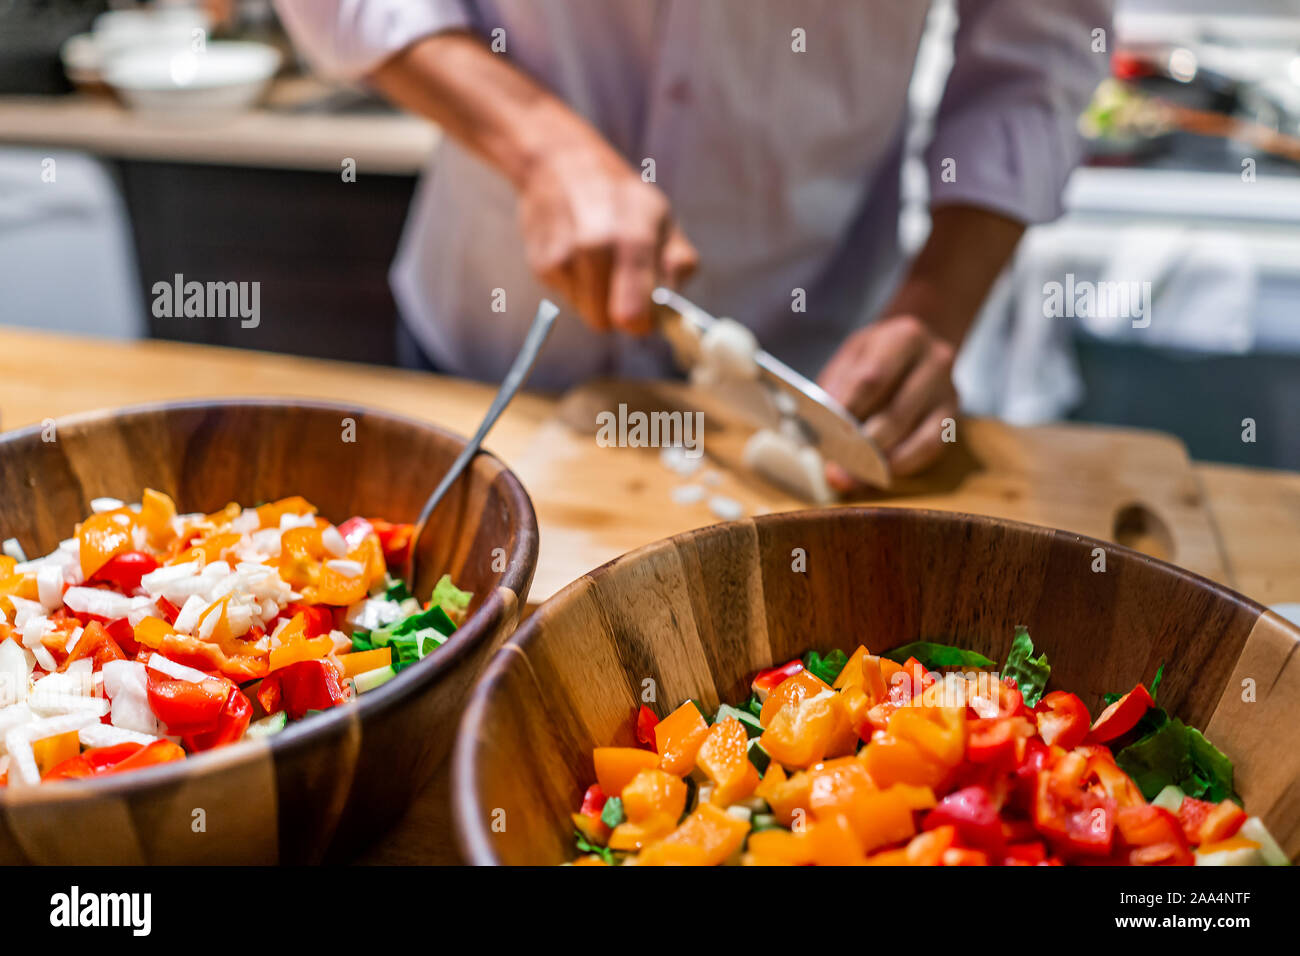 Man chopping onions on cutting board table in background with two large bowls of fresh vegan salad with red orange bell peppers in kitchen Stock Photo